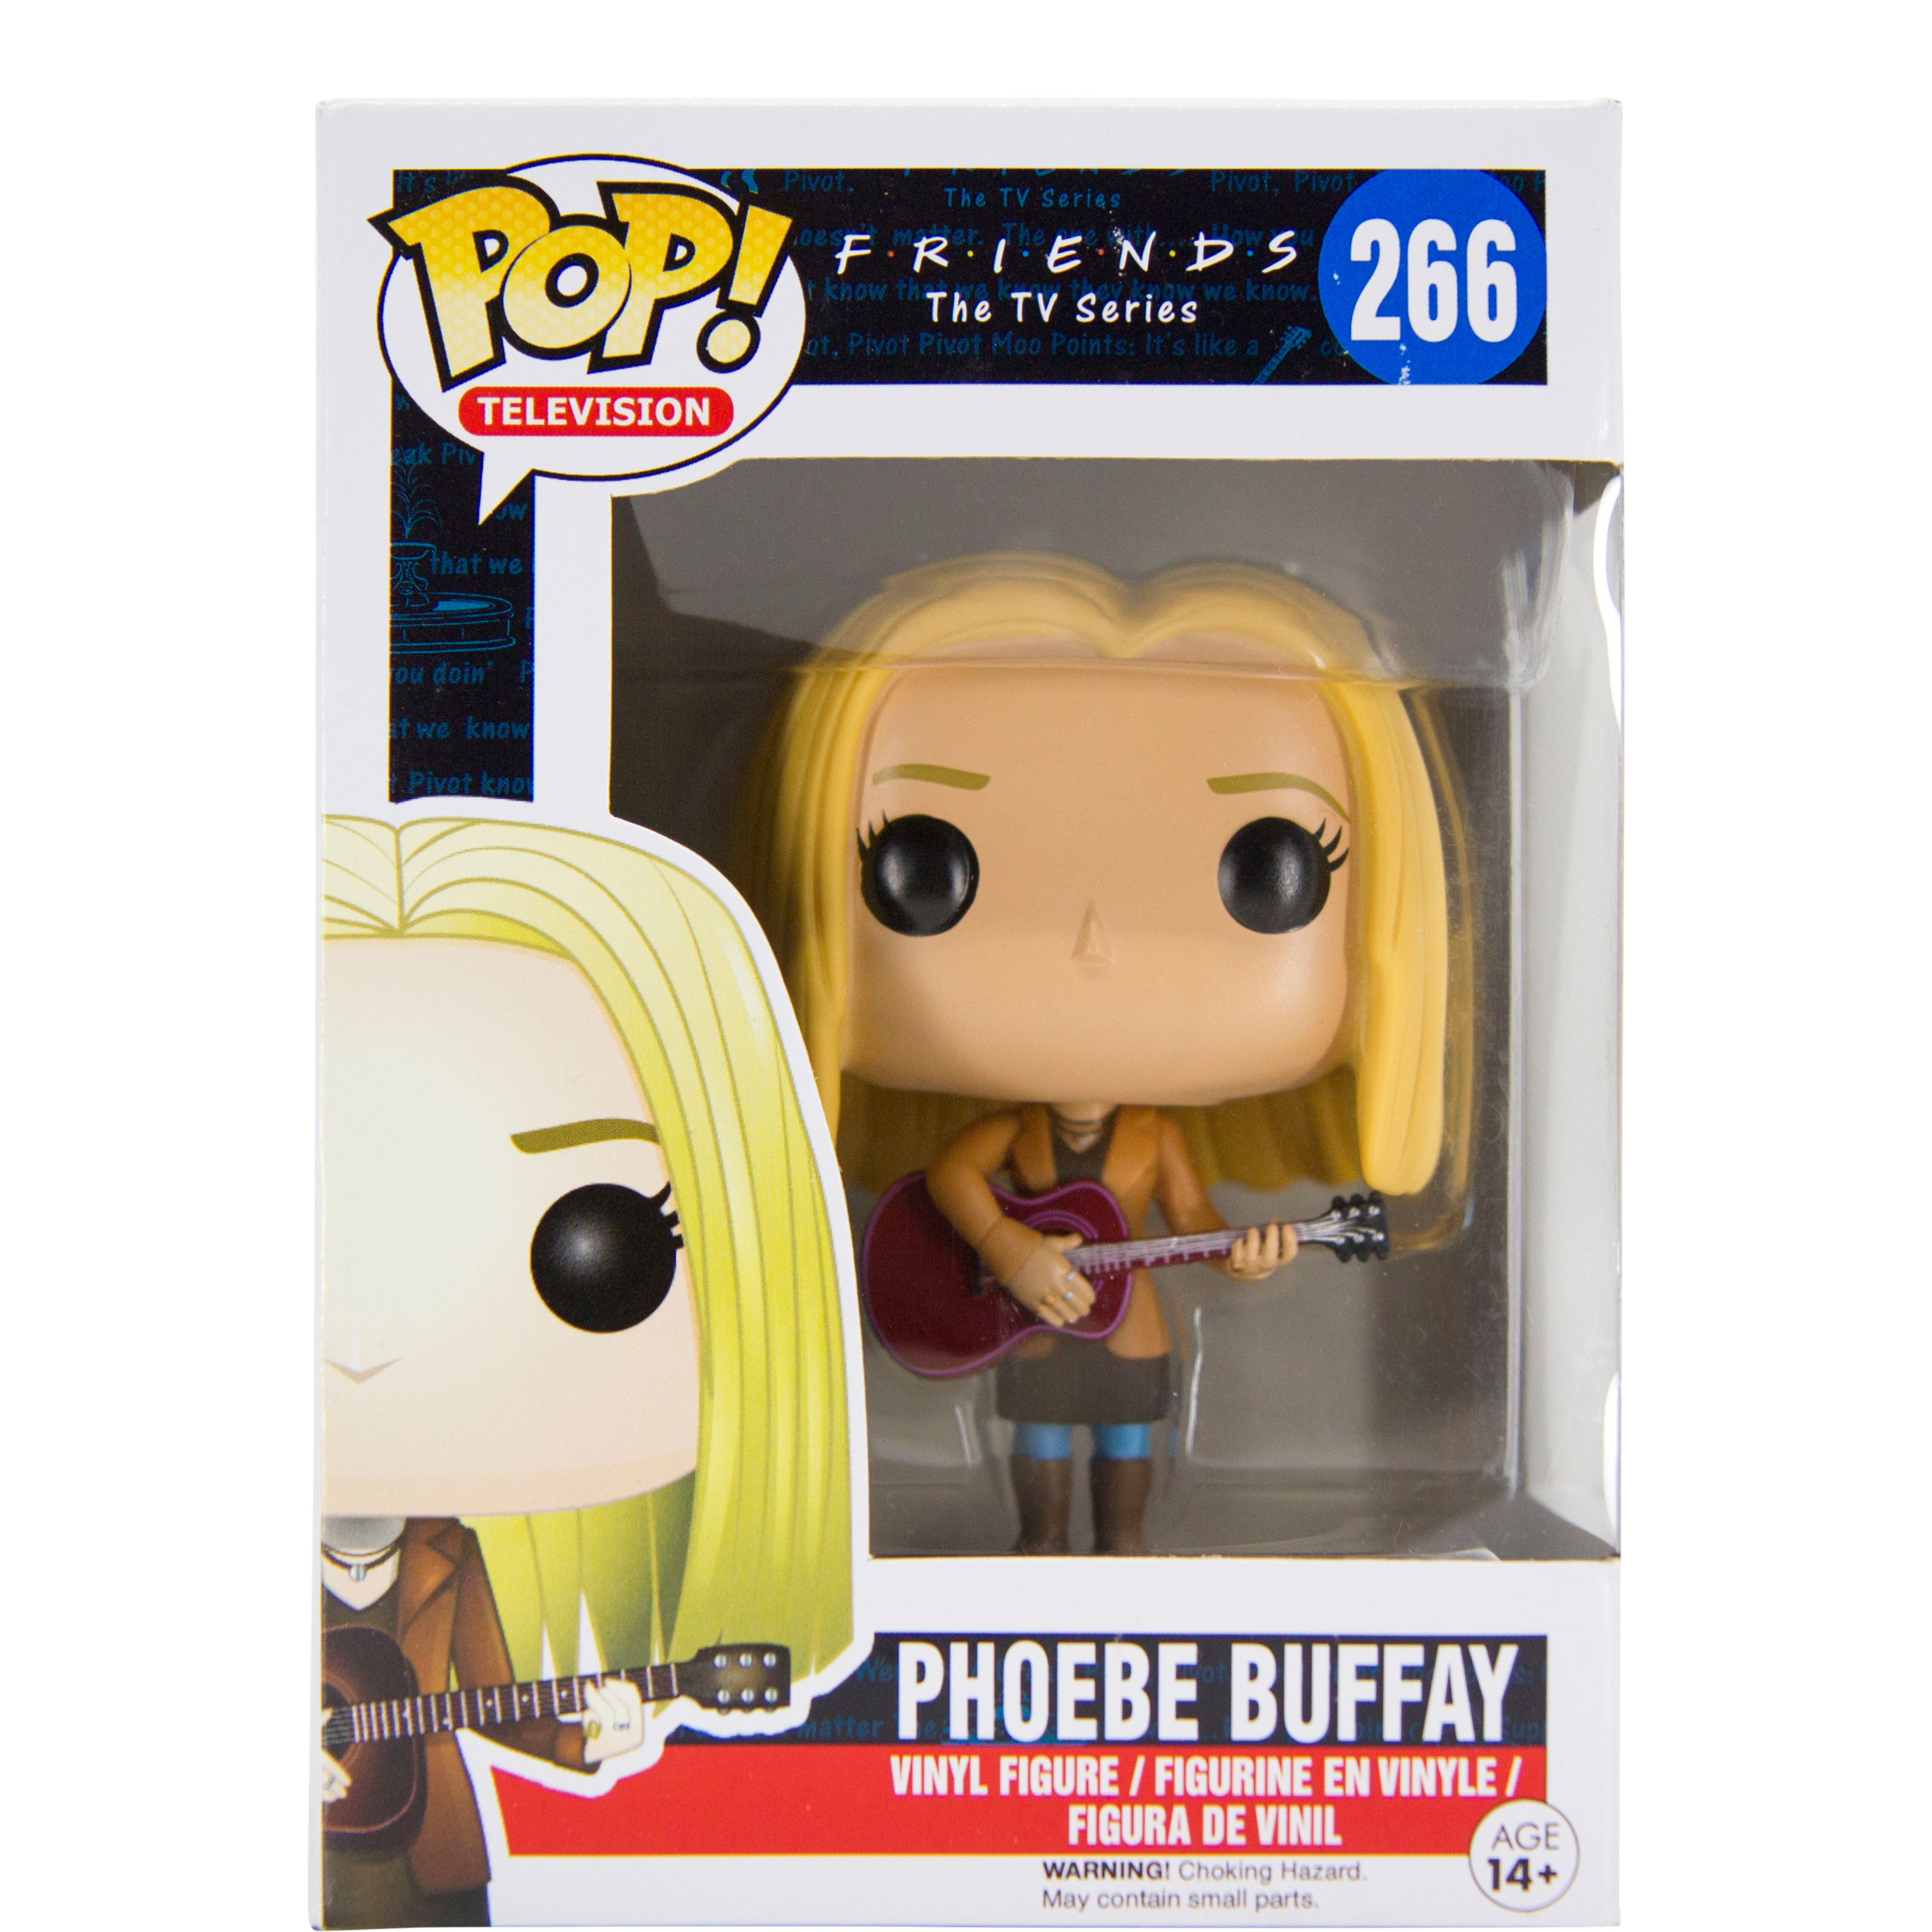 Funko Pop 3.75 Television: Friends Series 2 Collectible Vinyl Figures Set of 6 